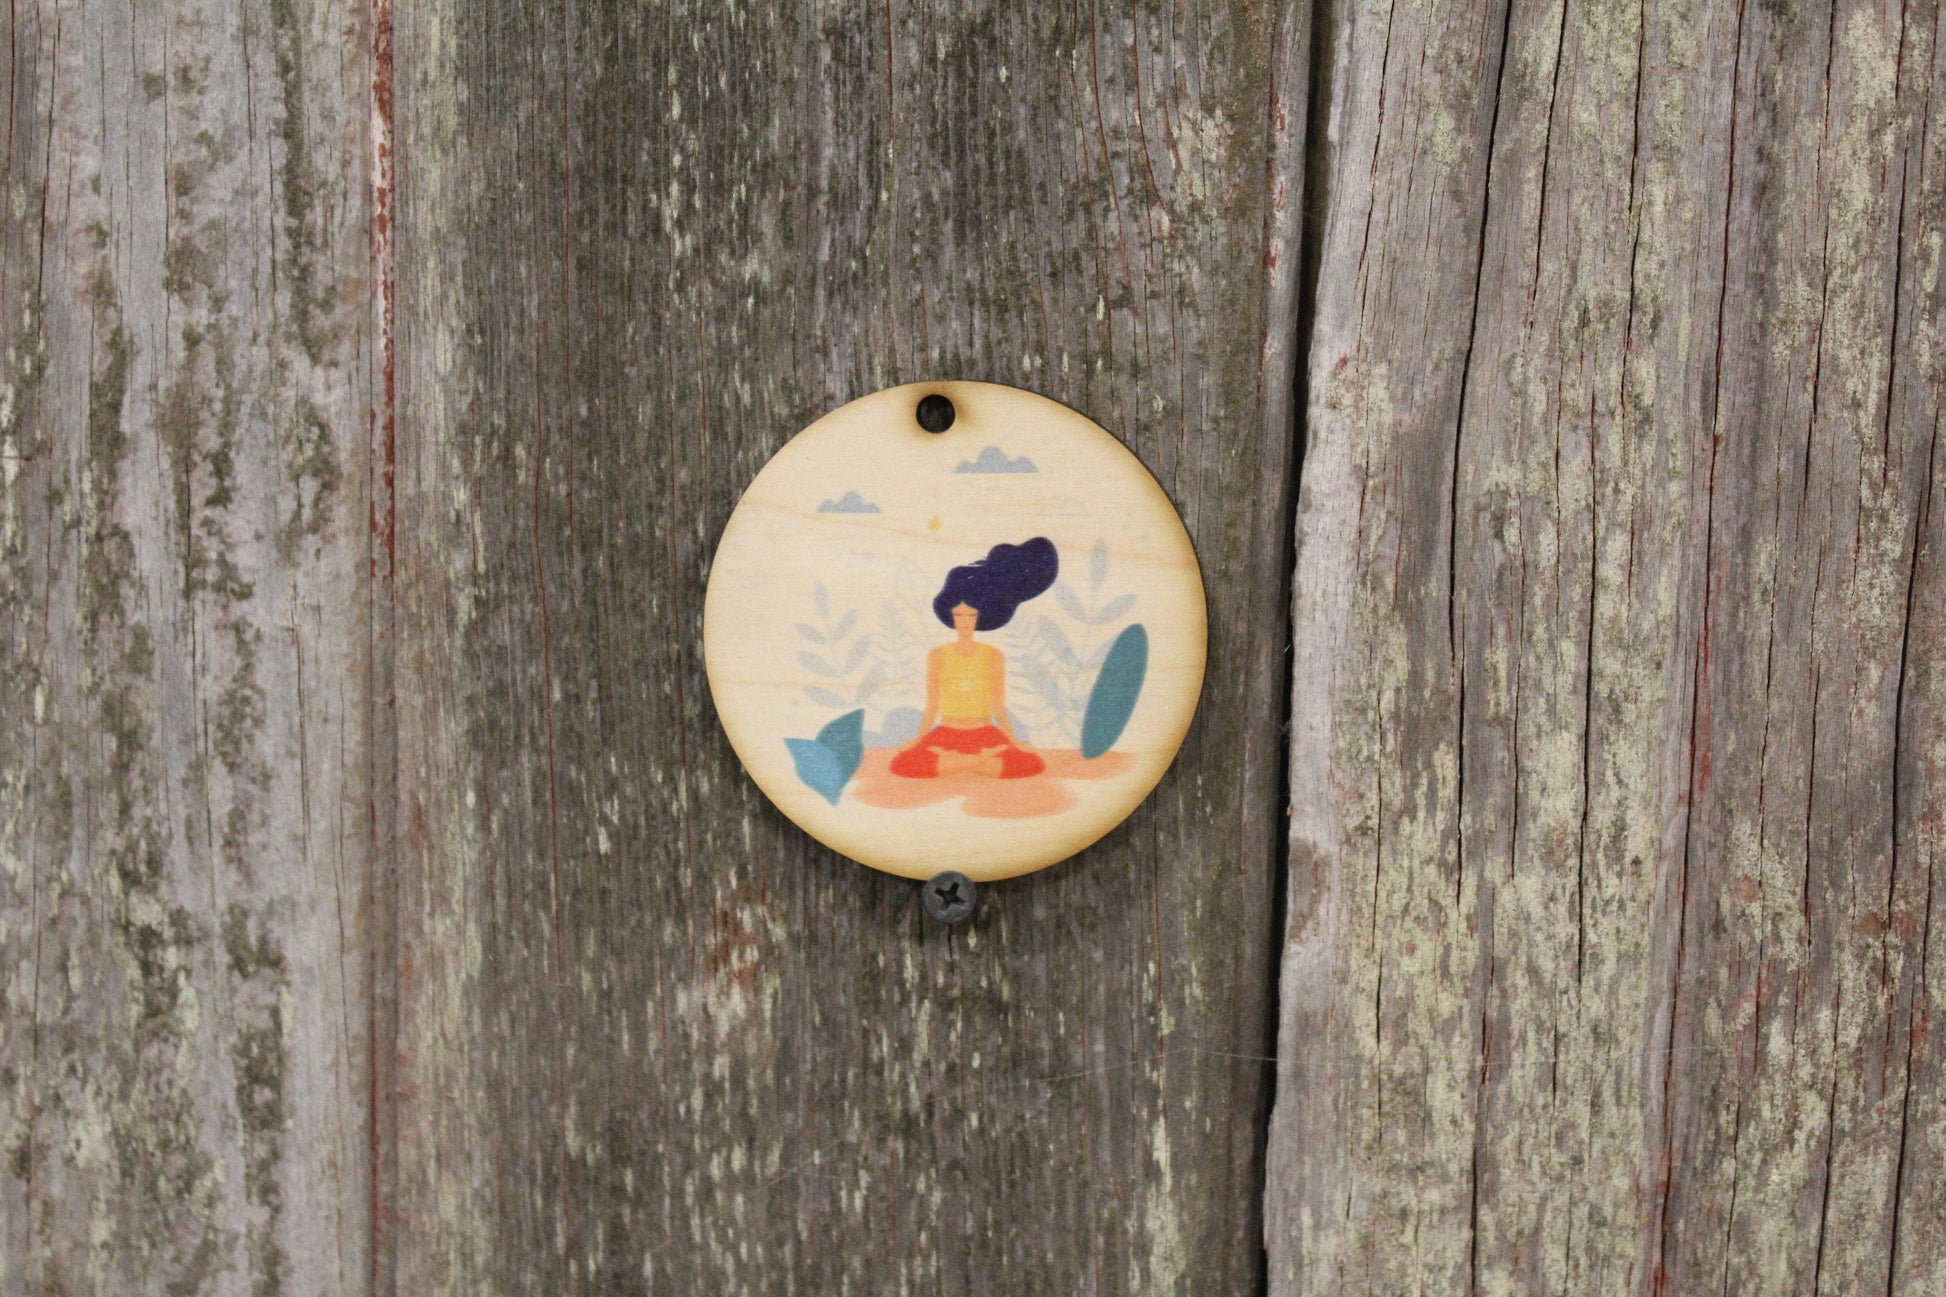 Yoga Meditate Peace Therapy Exercise Tranquility Minimalist Ornament Christmas Holiday Special Keychain Gift Gift tag Woodslice Circle